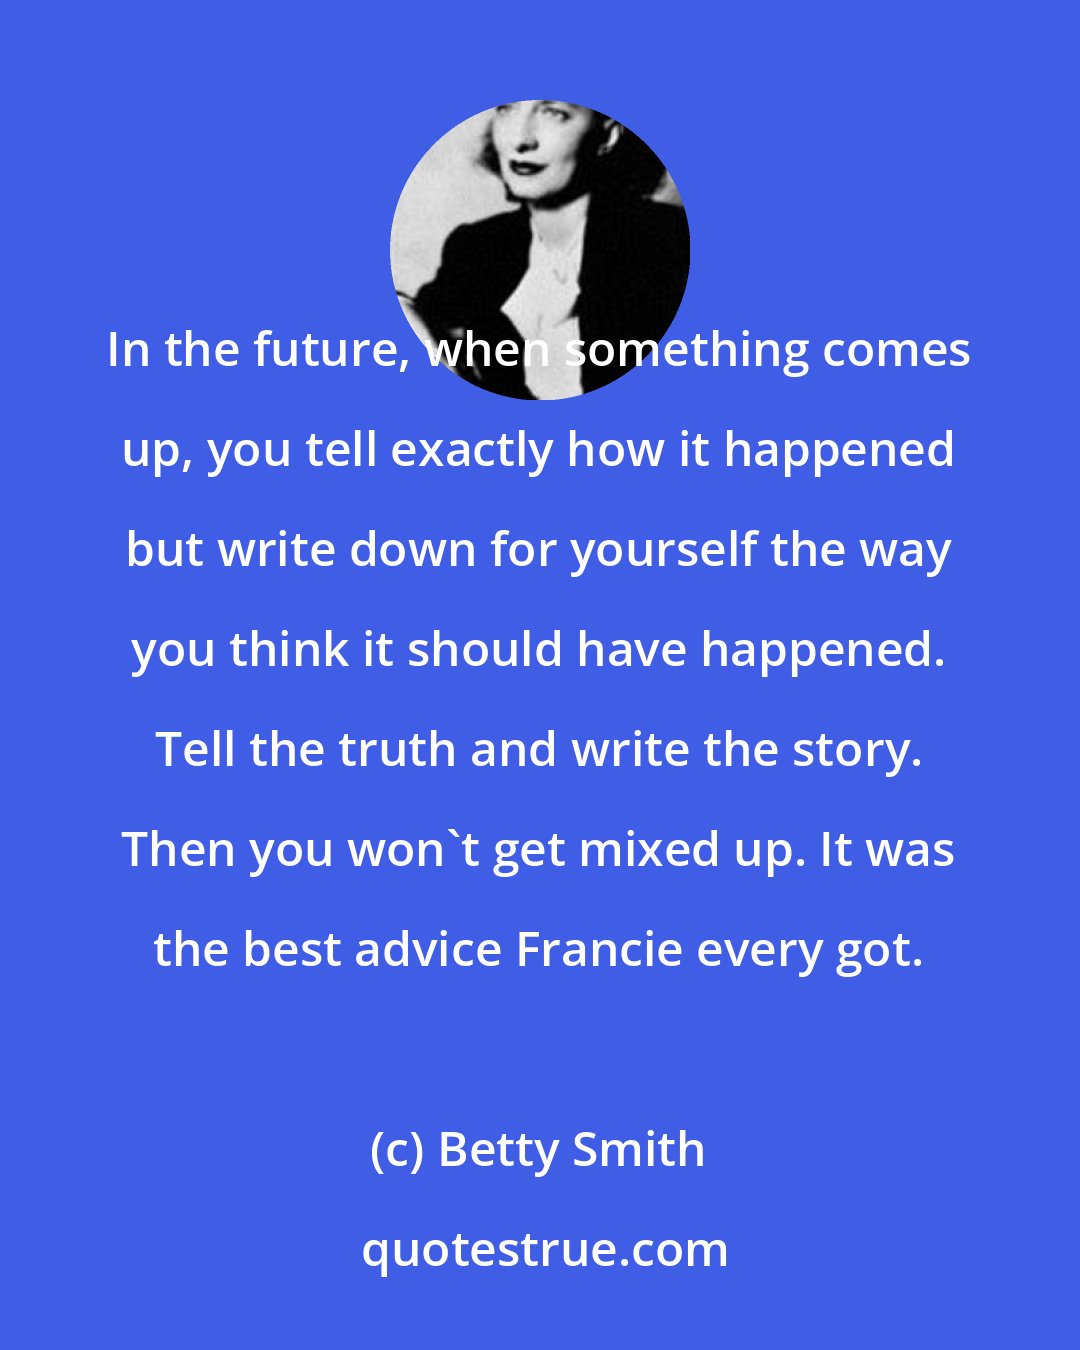 Betty Smith: In the future, when something comes up, you tell exactly how it happened but write down for yourself the way you think it should have happened. Tell the truth and write the story. Then you won't get mixed up. It was the best advice Francie every got.